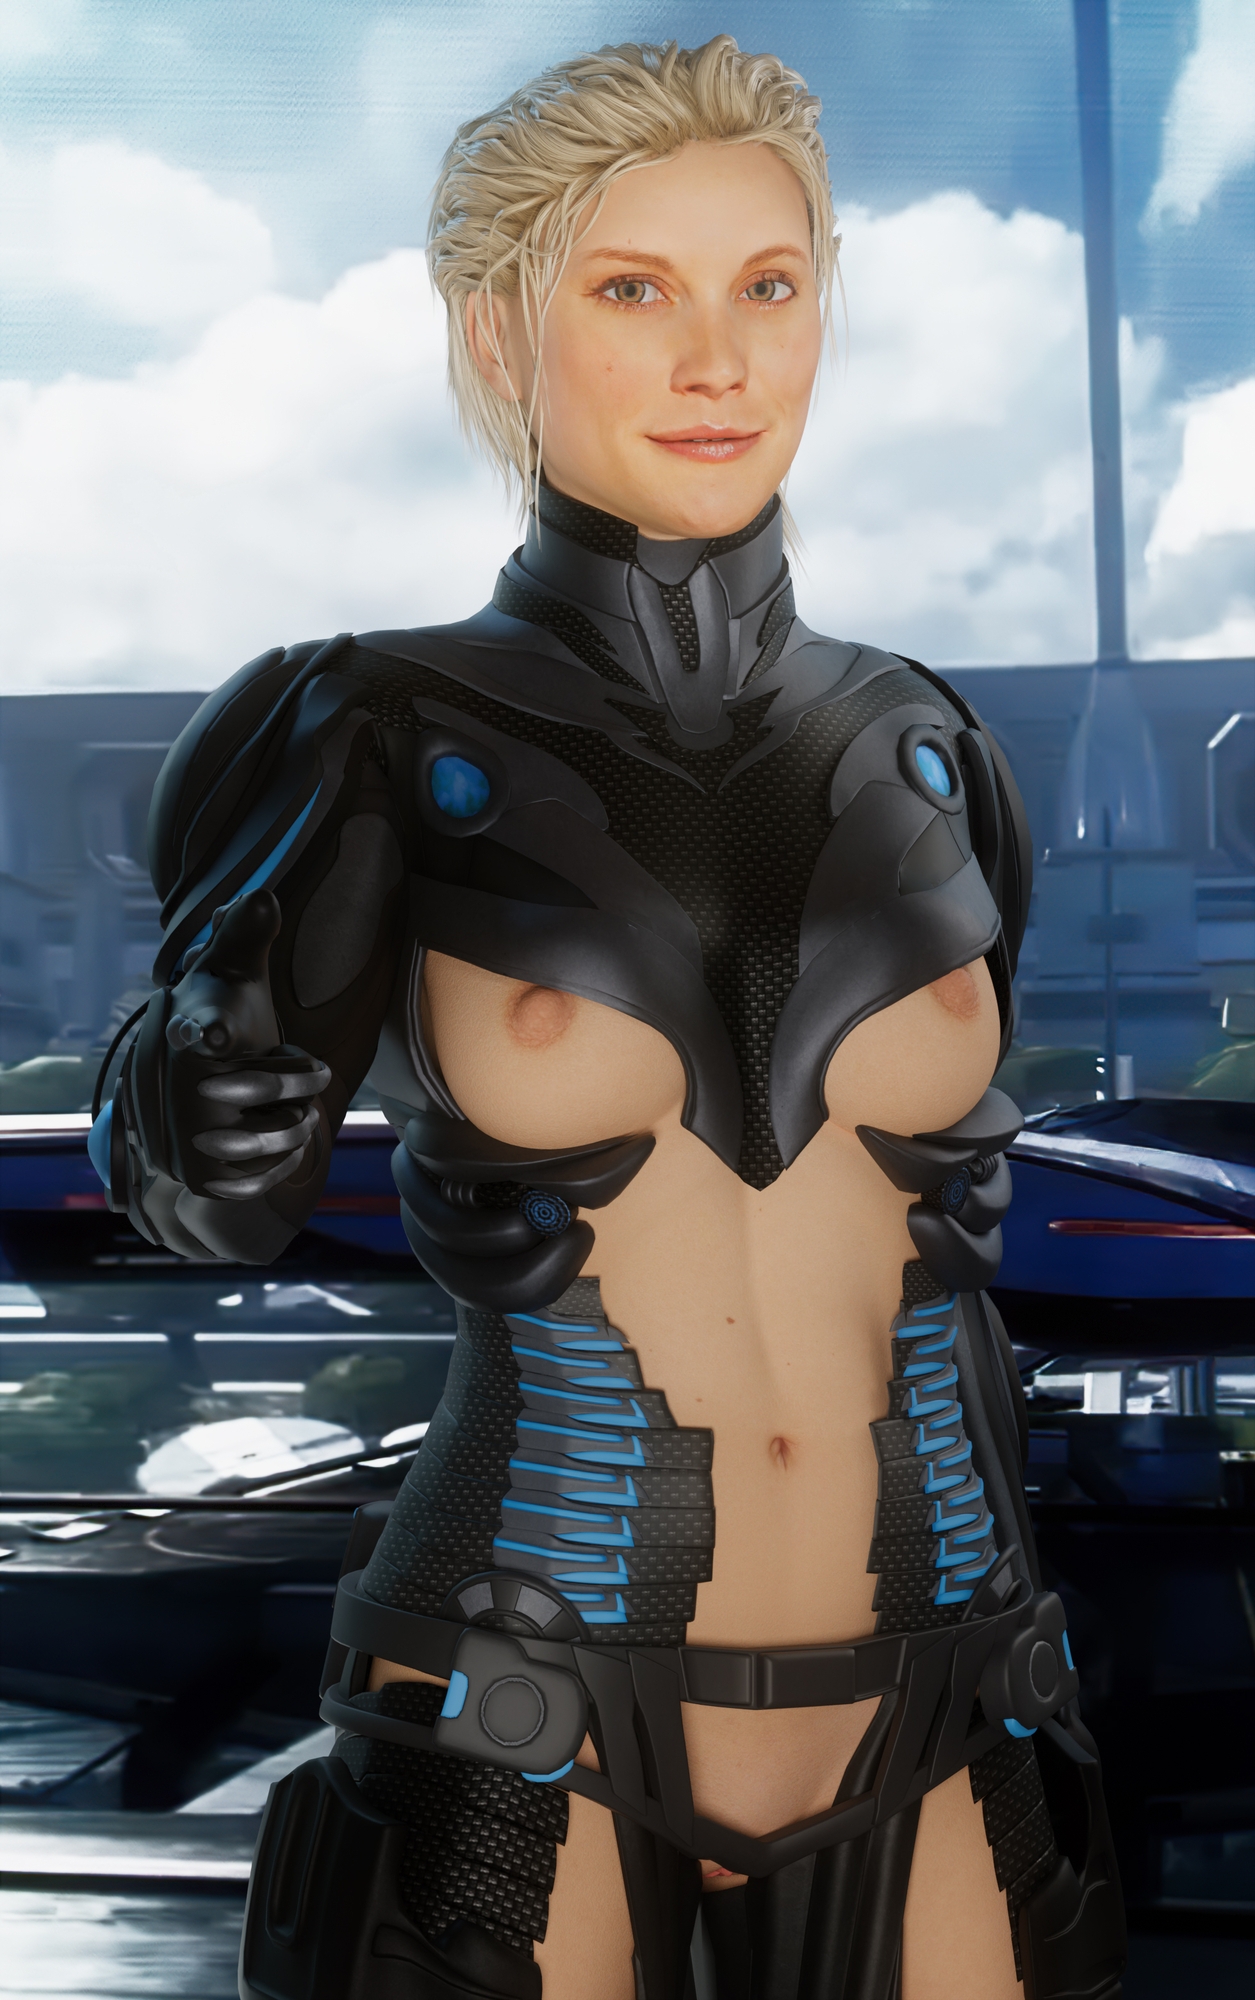 Katee Sackhoff as Cora from MEA Mass Effect 